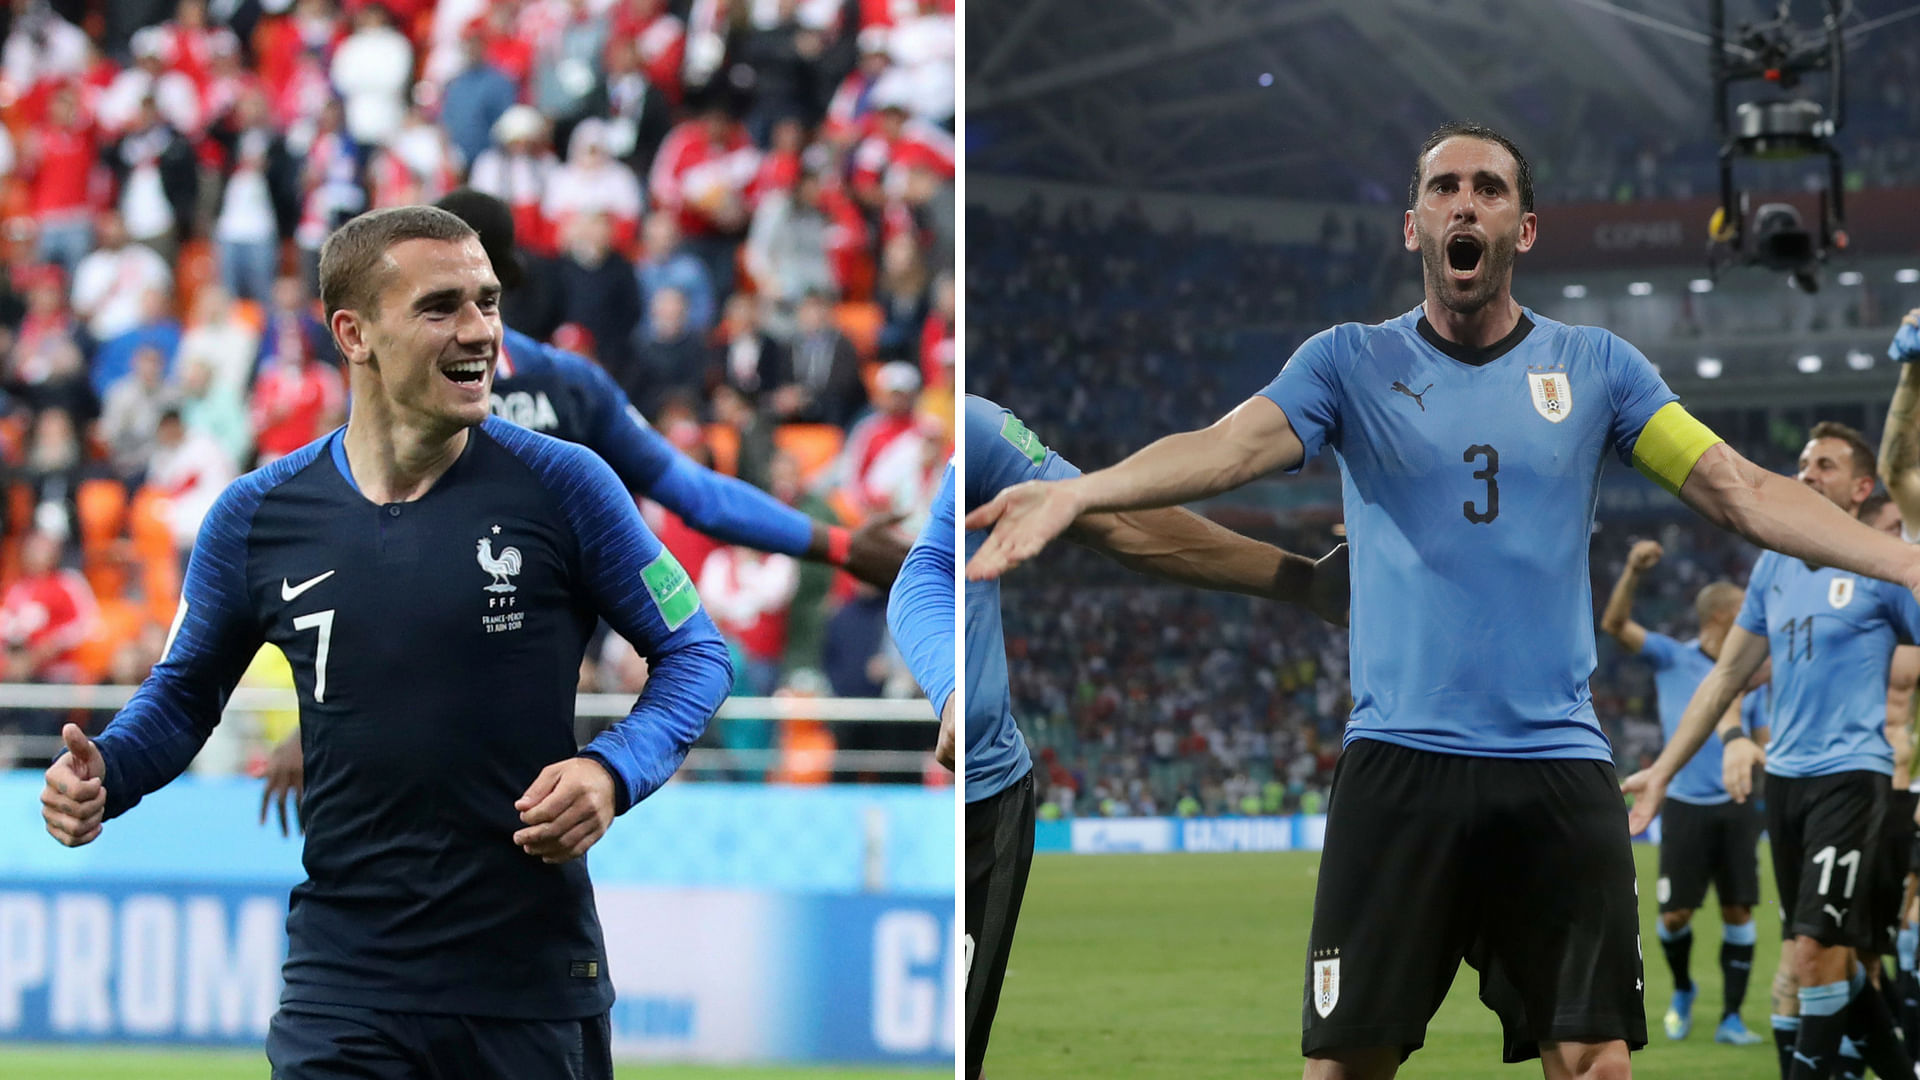 Atletico Madrid teammates Antoine Griezmann and Diego Godin are close friends off the pitch but exemplify the different styles the teams play with